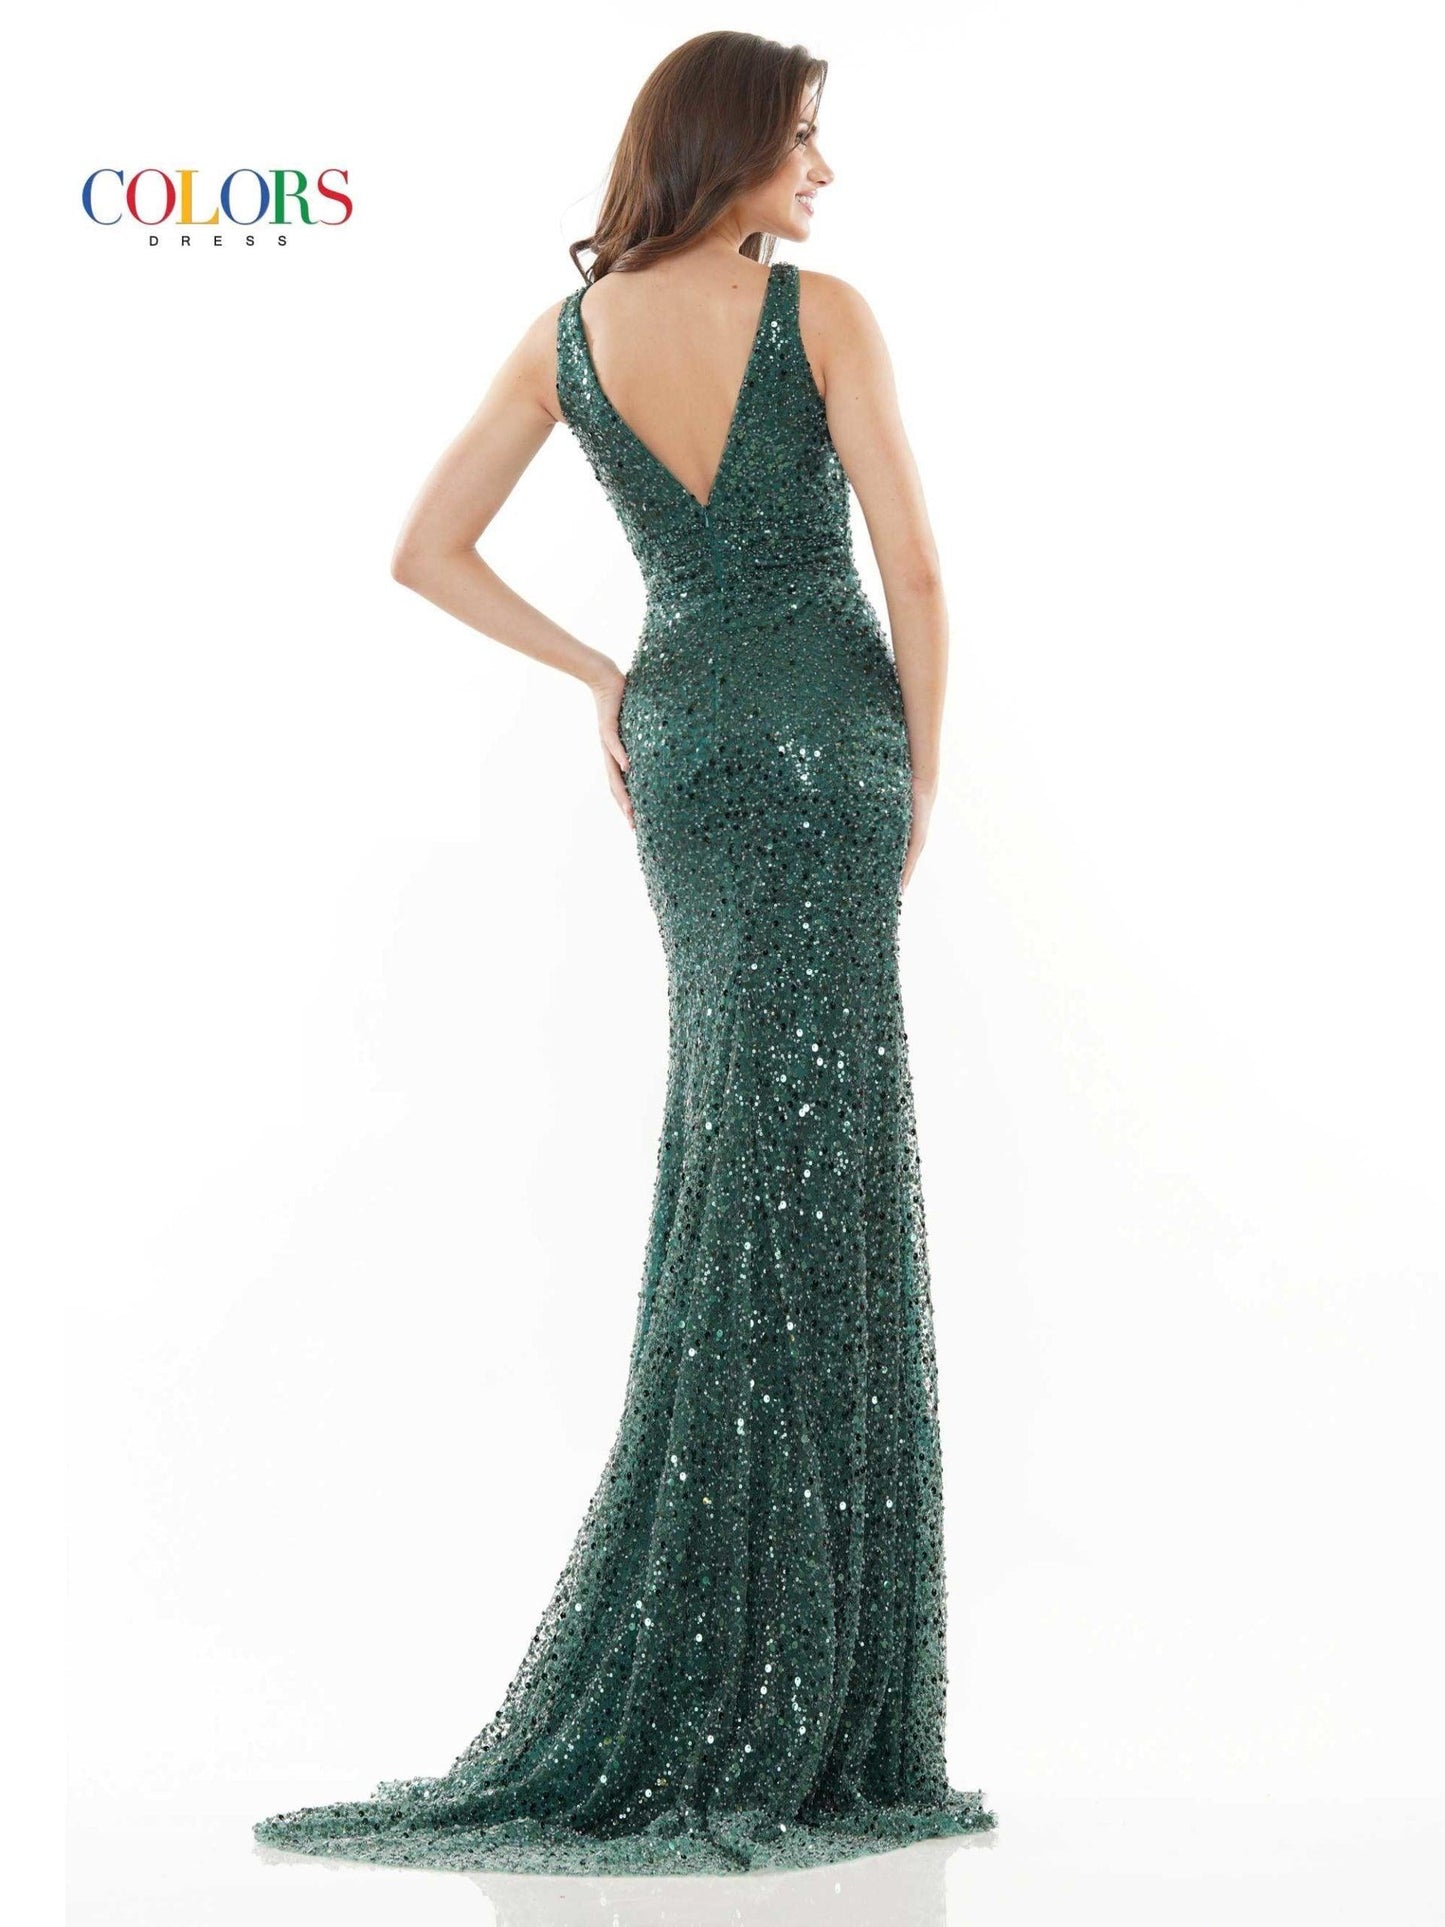 Colors Prom Long Sleeveless Formal Dress 2718 - The Dress Outlet